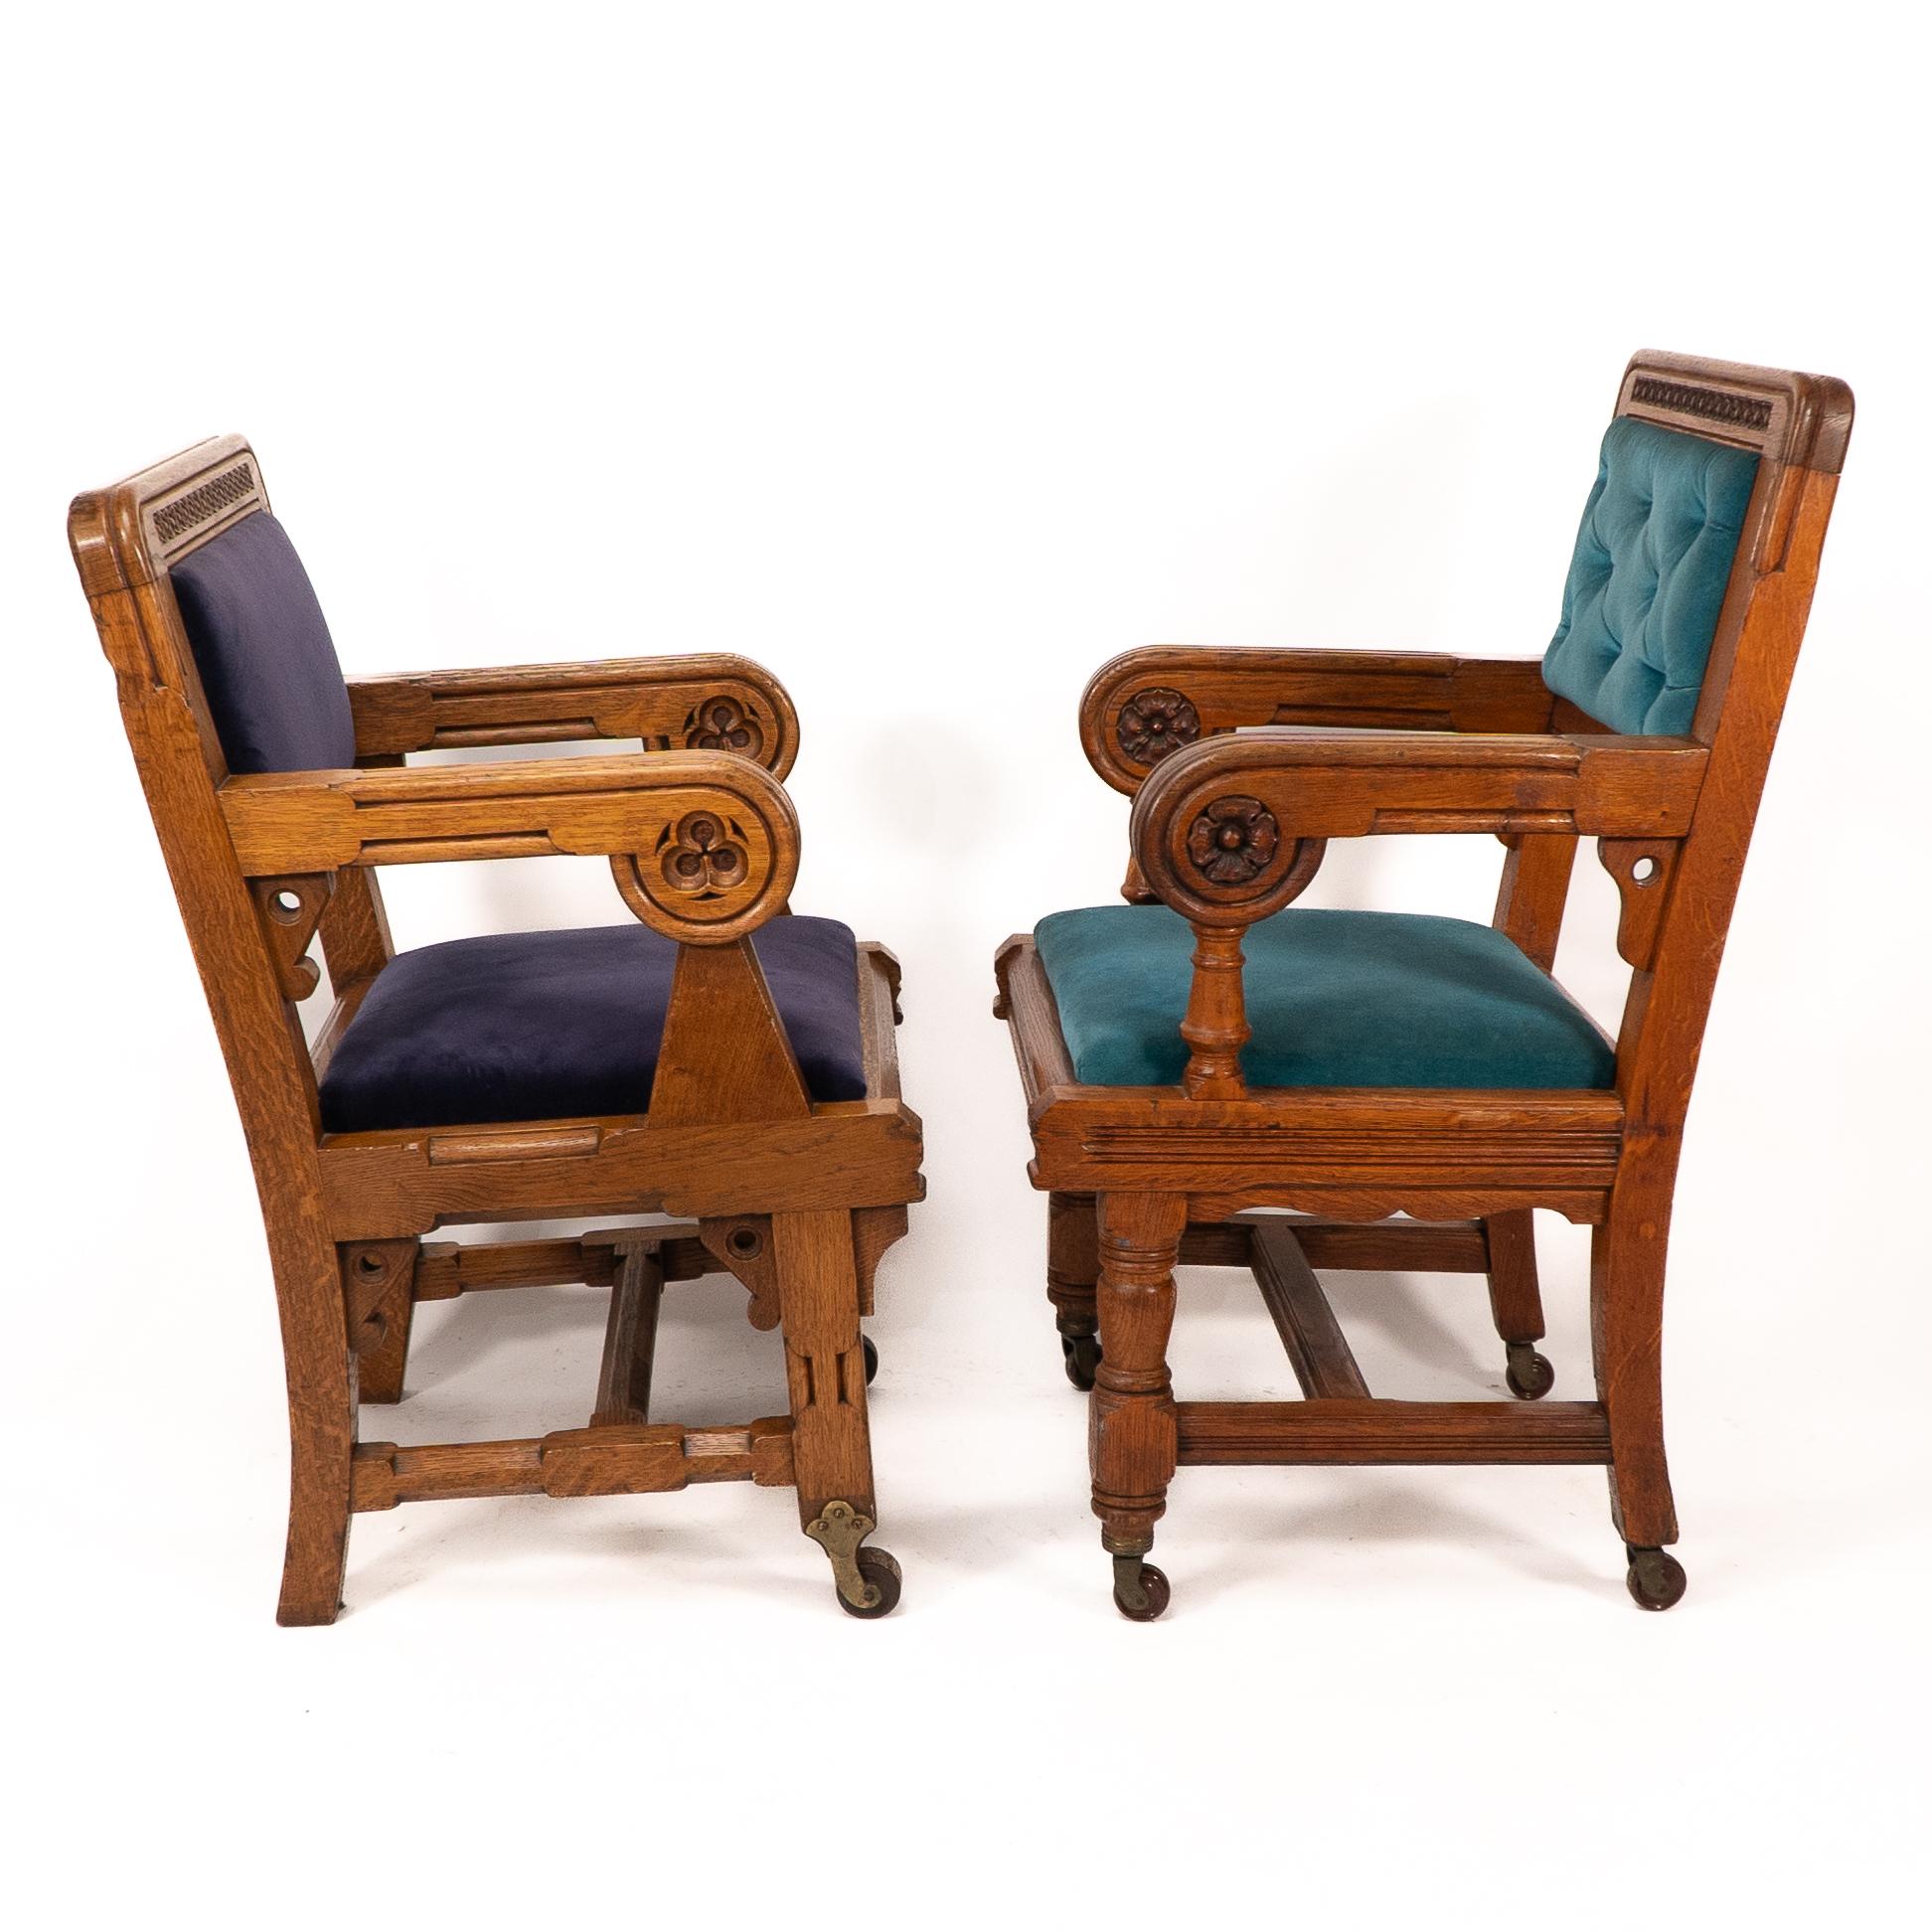 Bruce Talbert. Gillows of Lancaster. 
Two rare Gothic Revival armchairs.
*The two with dark and light blue upholstery shown here are available, the one with brown upholstery is now sold*.
The two blue ones are almost identical except one has square